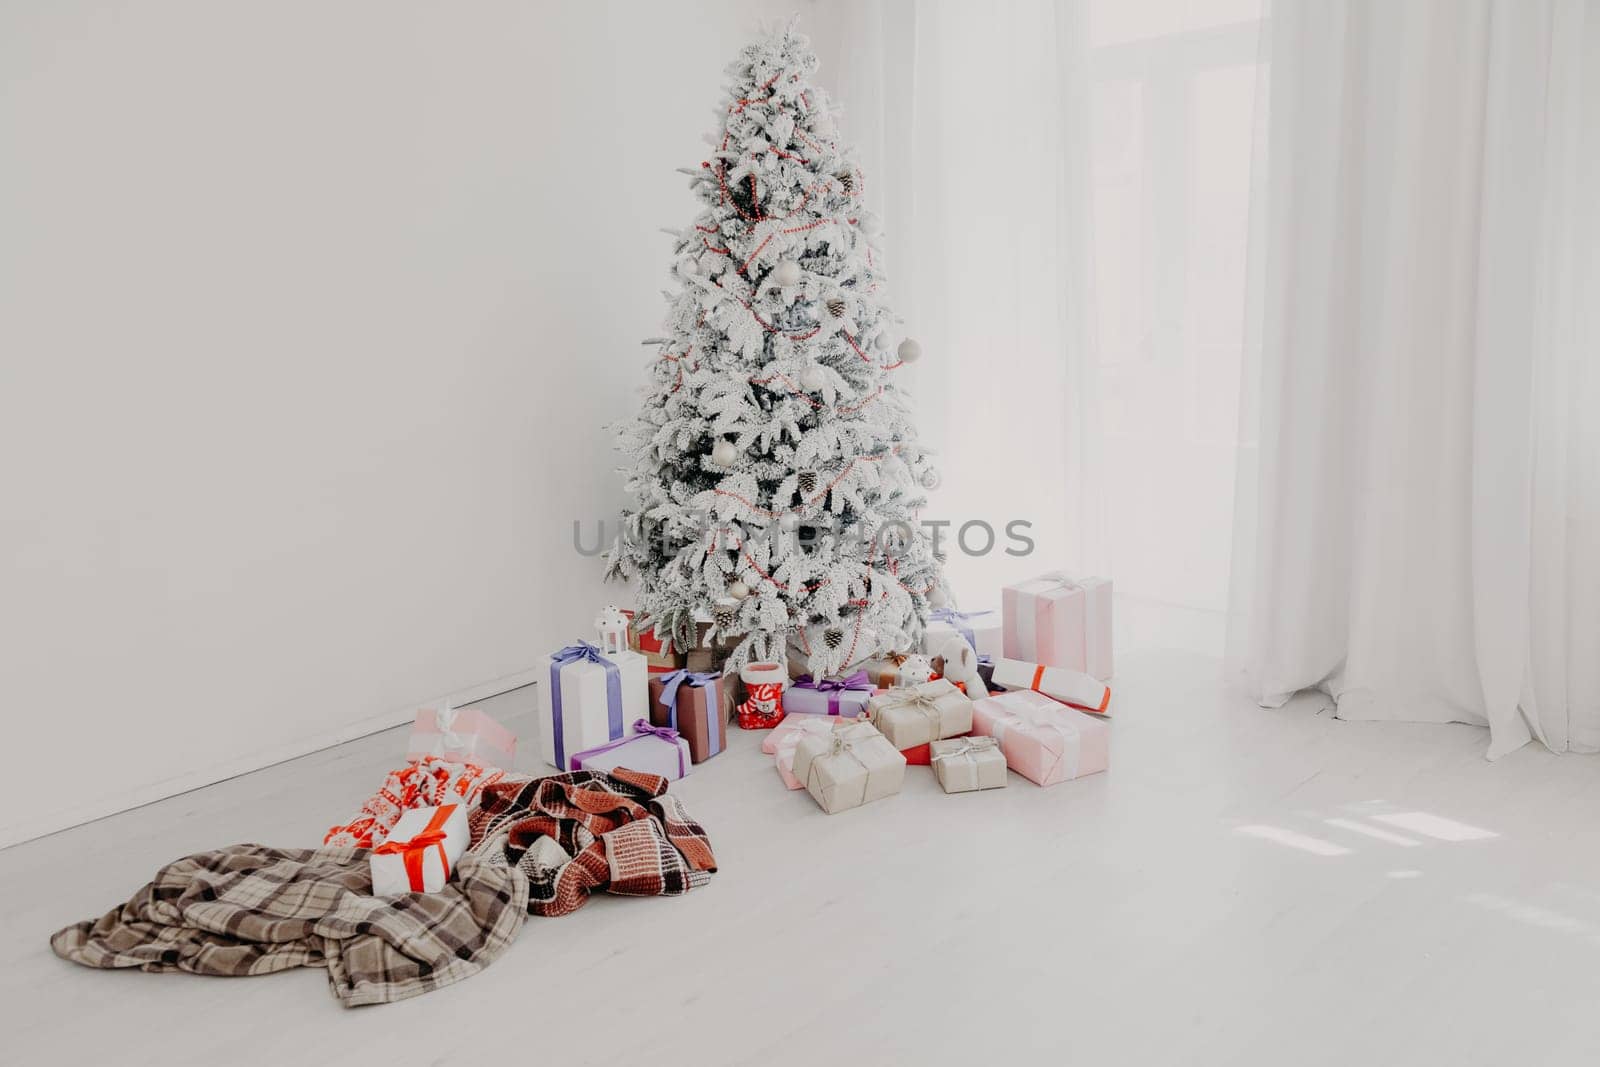 the Interior of the white room with a Christmas tree and Christmas gifts 8